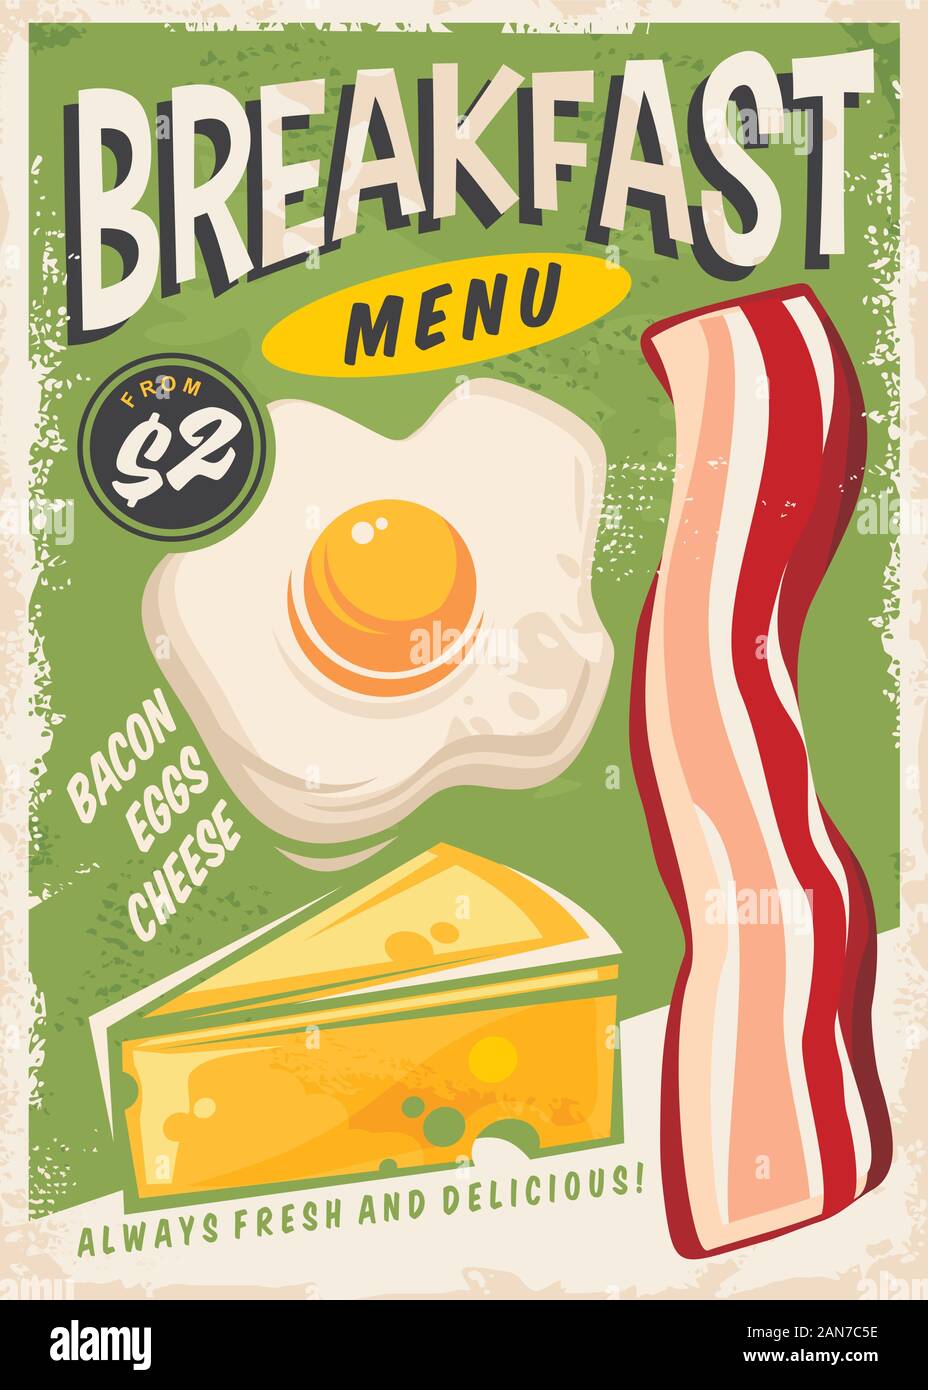 Breakfast Menu Promo Ad Design With Egg Bacon And Cheese Retro Poster For Fast Food Restaurant Vector Food Flyer Stock Vector Image Art Alamy